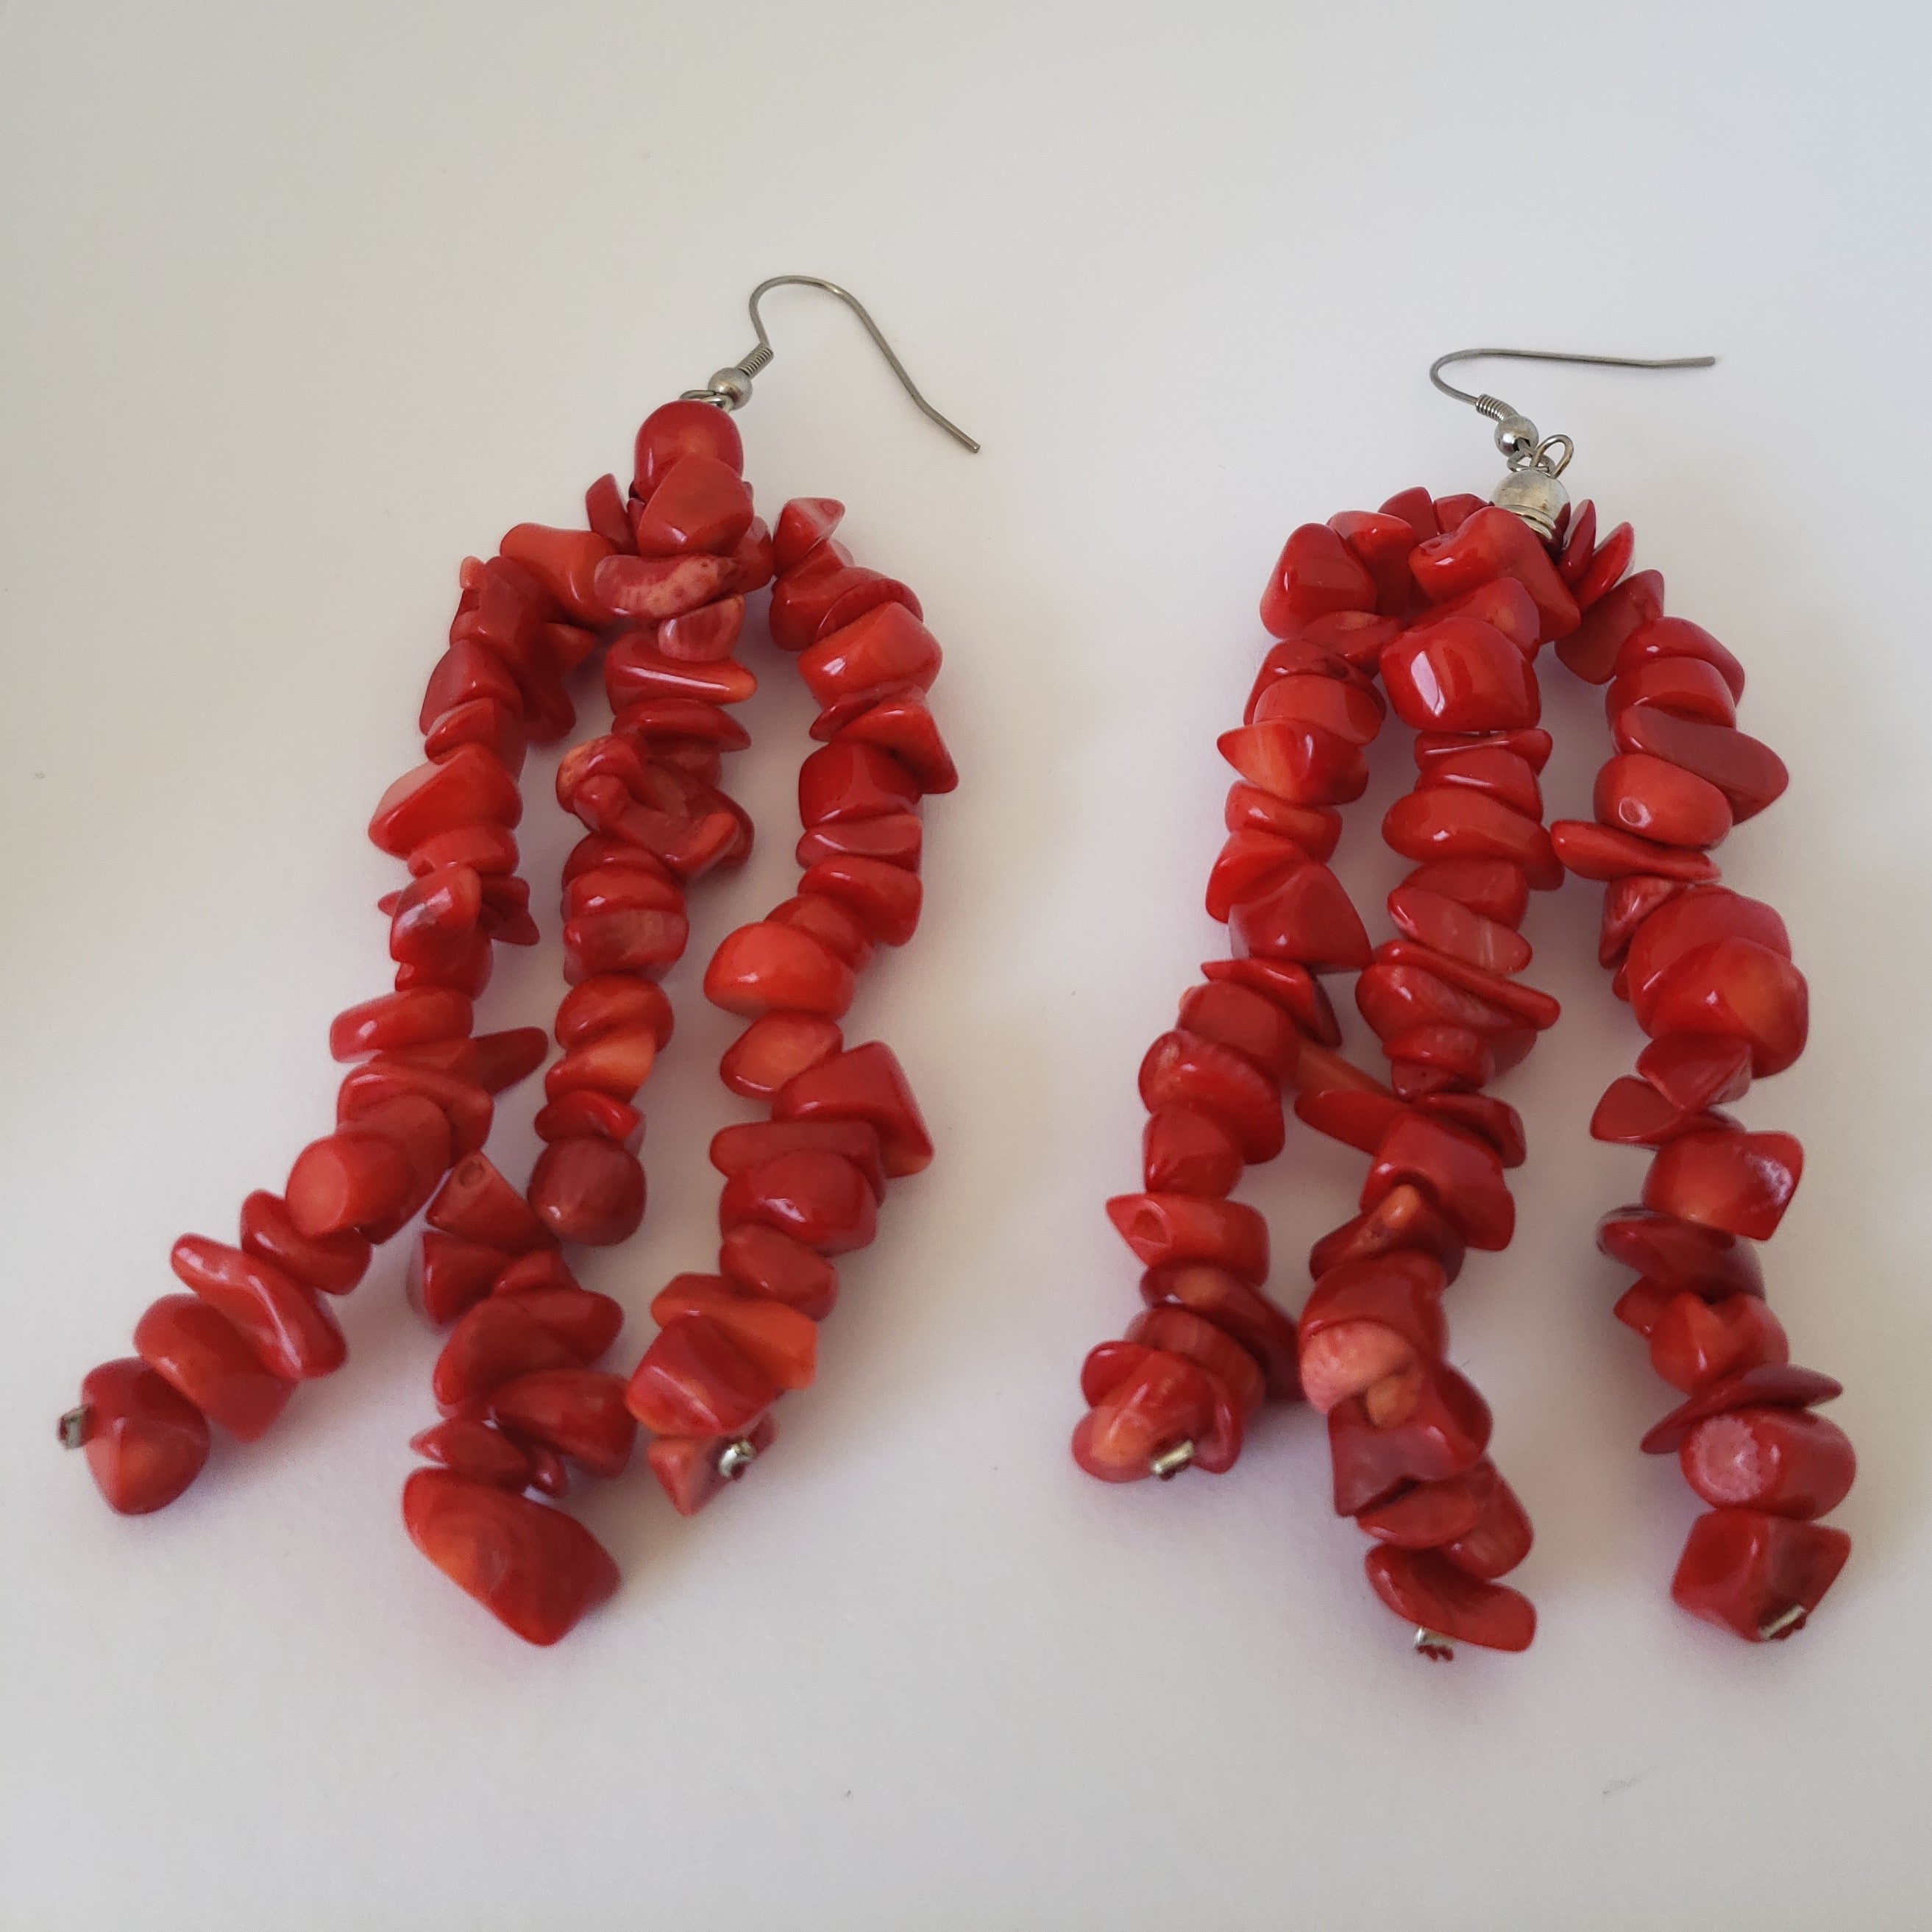 Polished Red Coral Chip Beads Triple Strand Earrings in Stainless Steel - Houzz of DVA Boutique